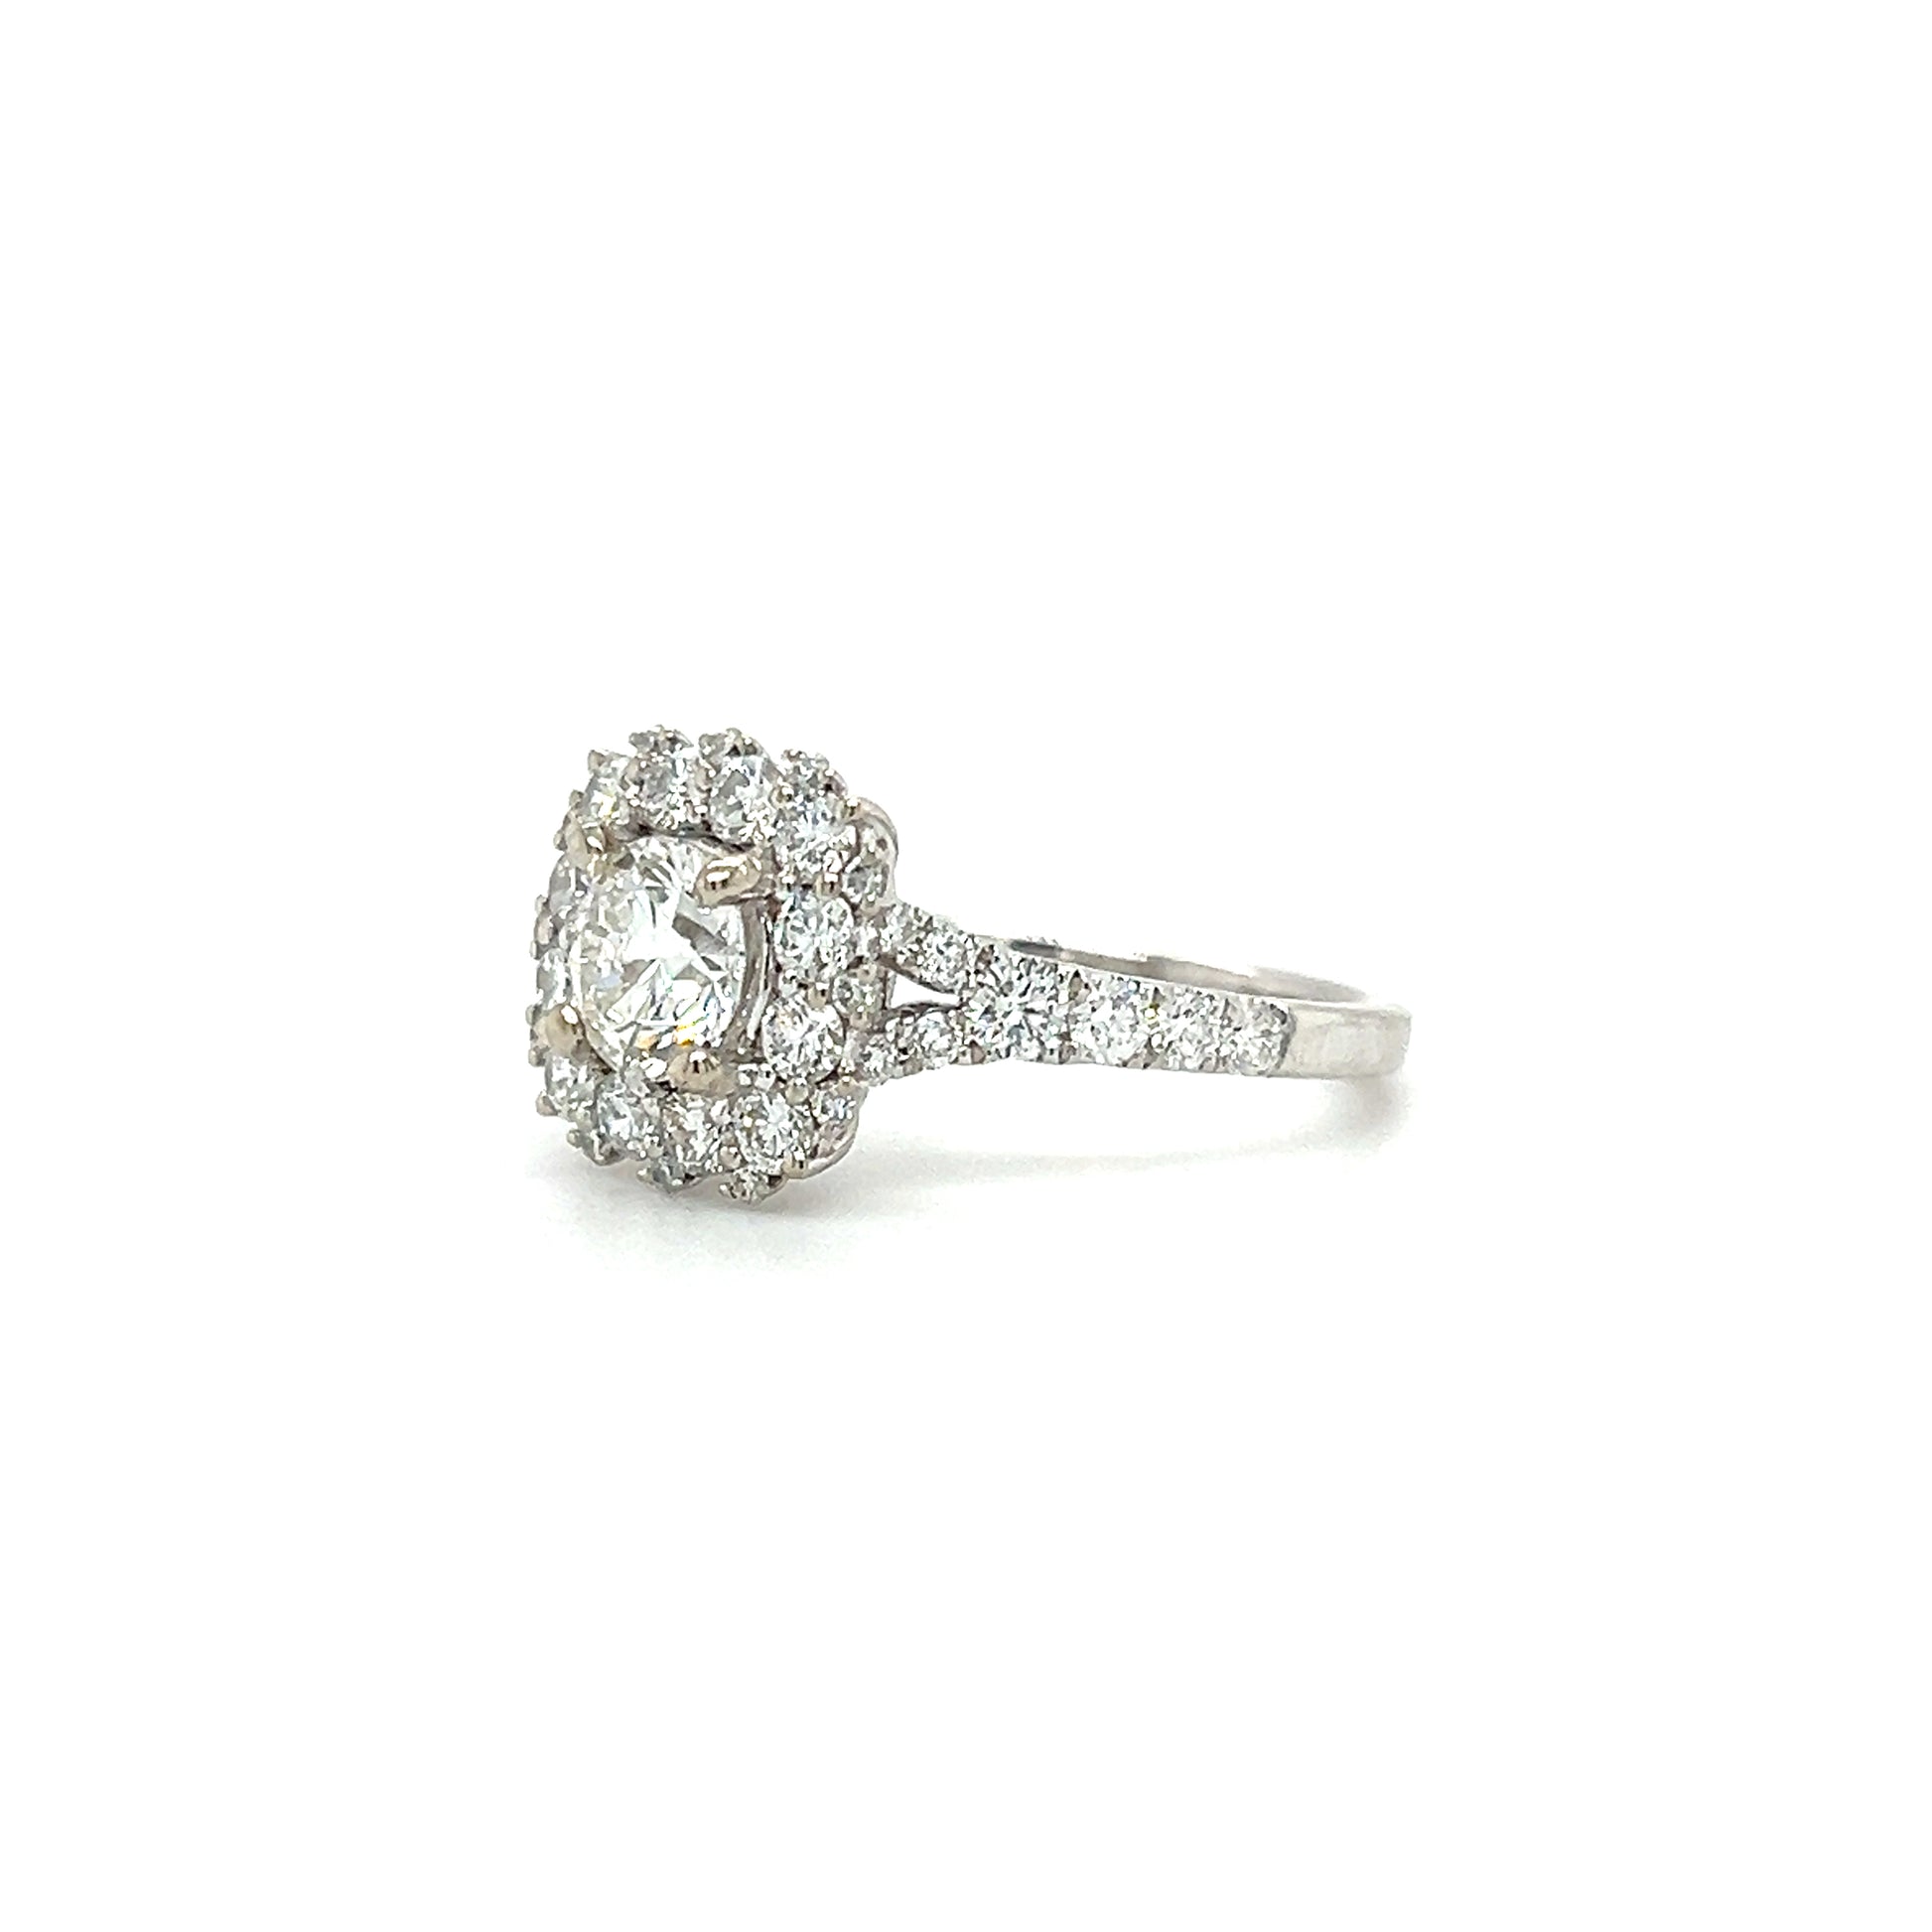 Diamond Halo Ring with 1.66ctw of Diamonds in 14K White Gold Right Side View